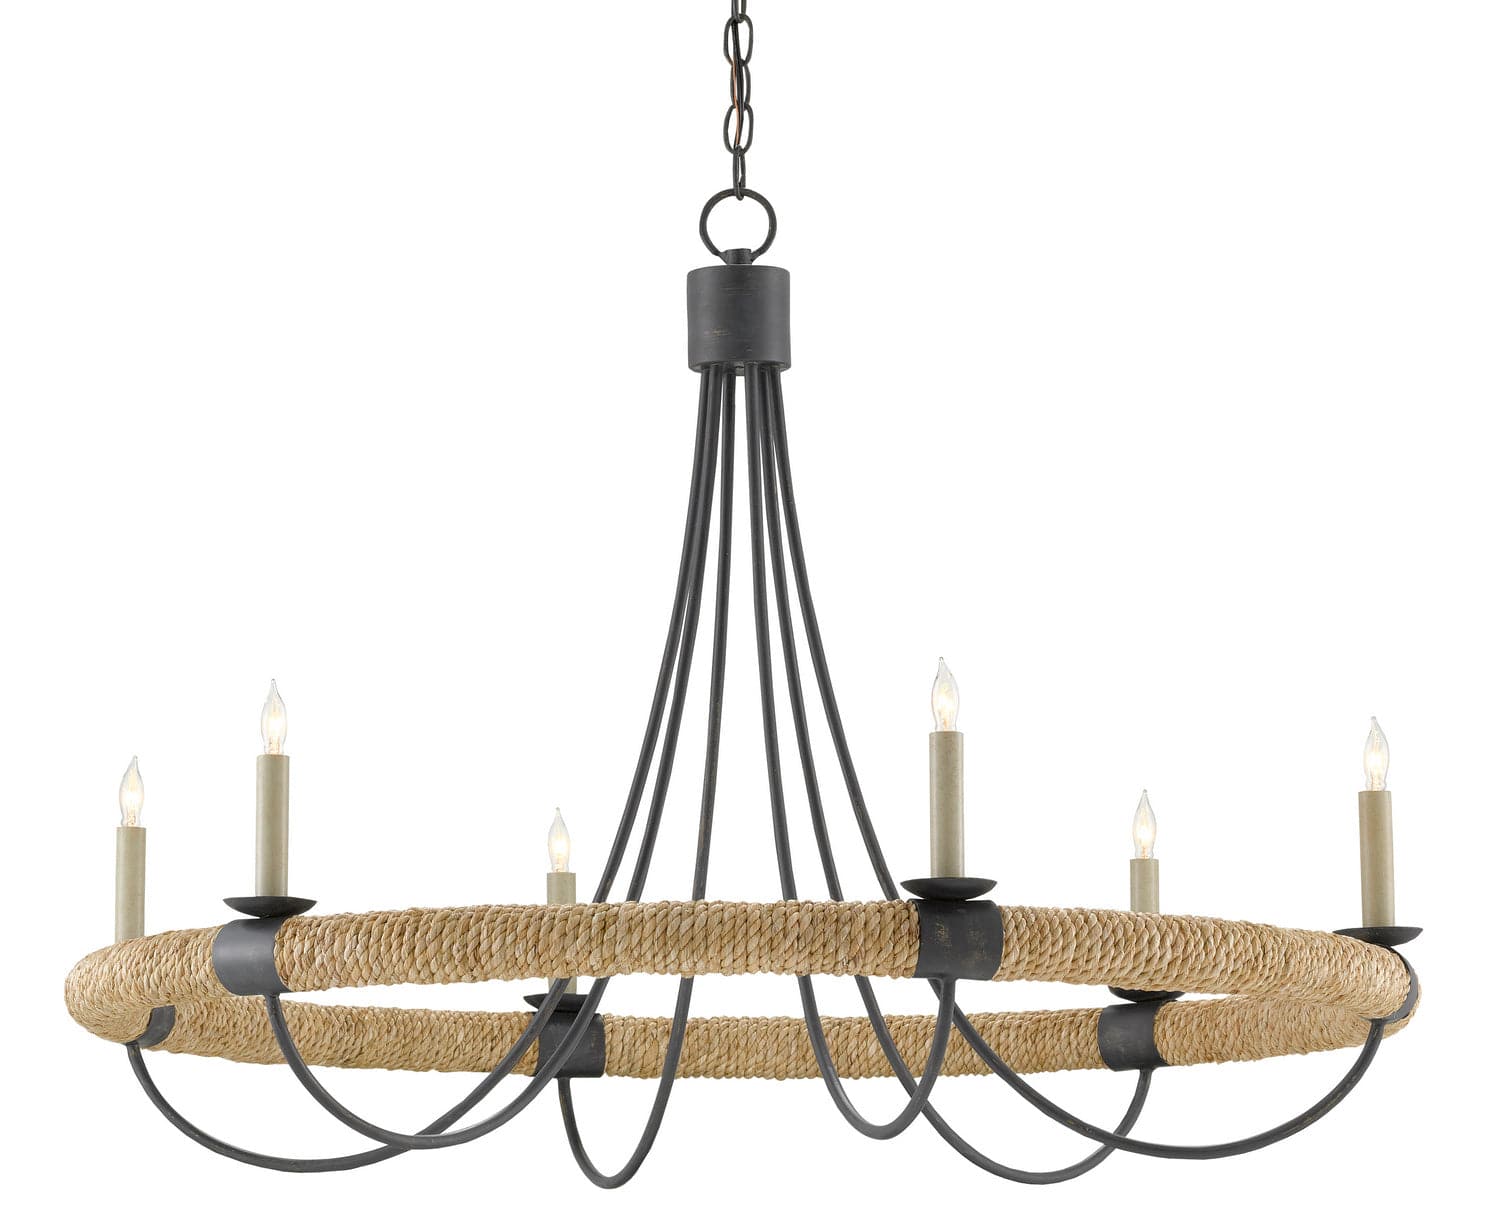 Six Light Chandelier from the Shipwright collection in French Black/Smokewood/Natural Abaca Rope finish